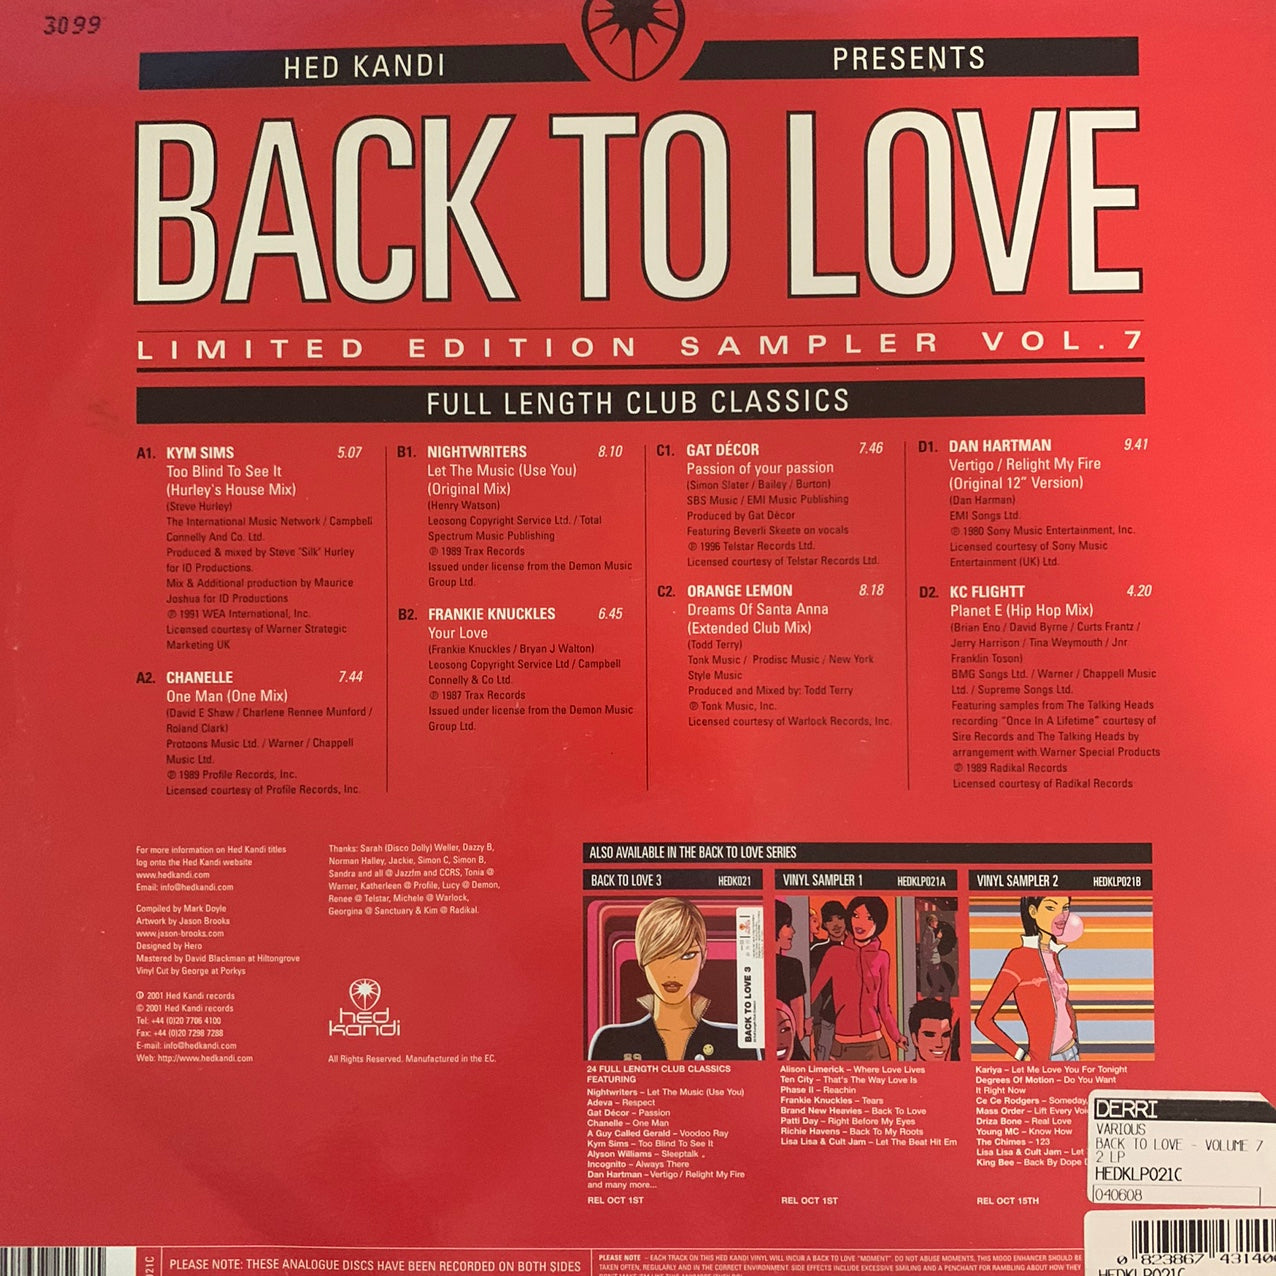 Hedkandi ‘Back To Love’ Limited Edition 12 Vinyl Club Classics 8 Track 12inch Vinyl Double Pack